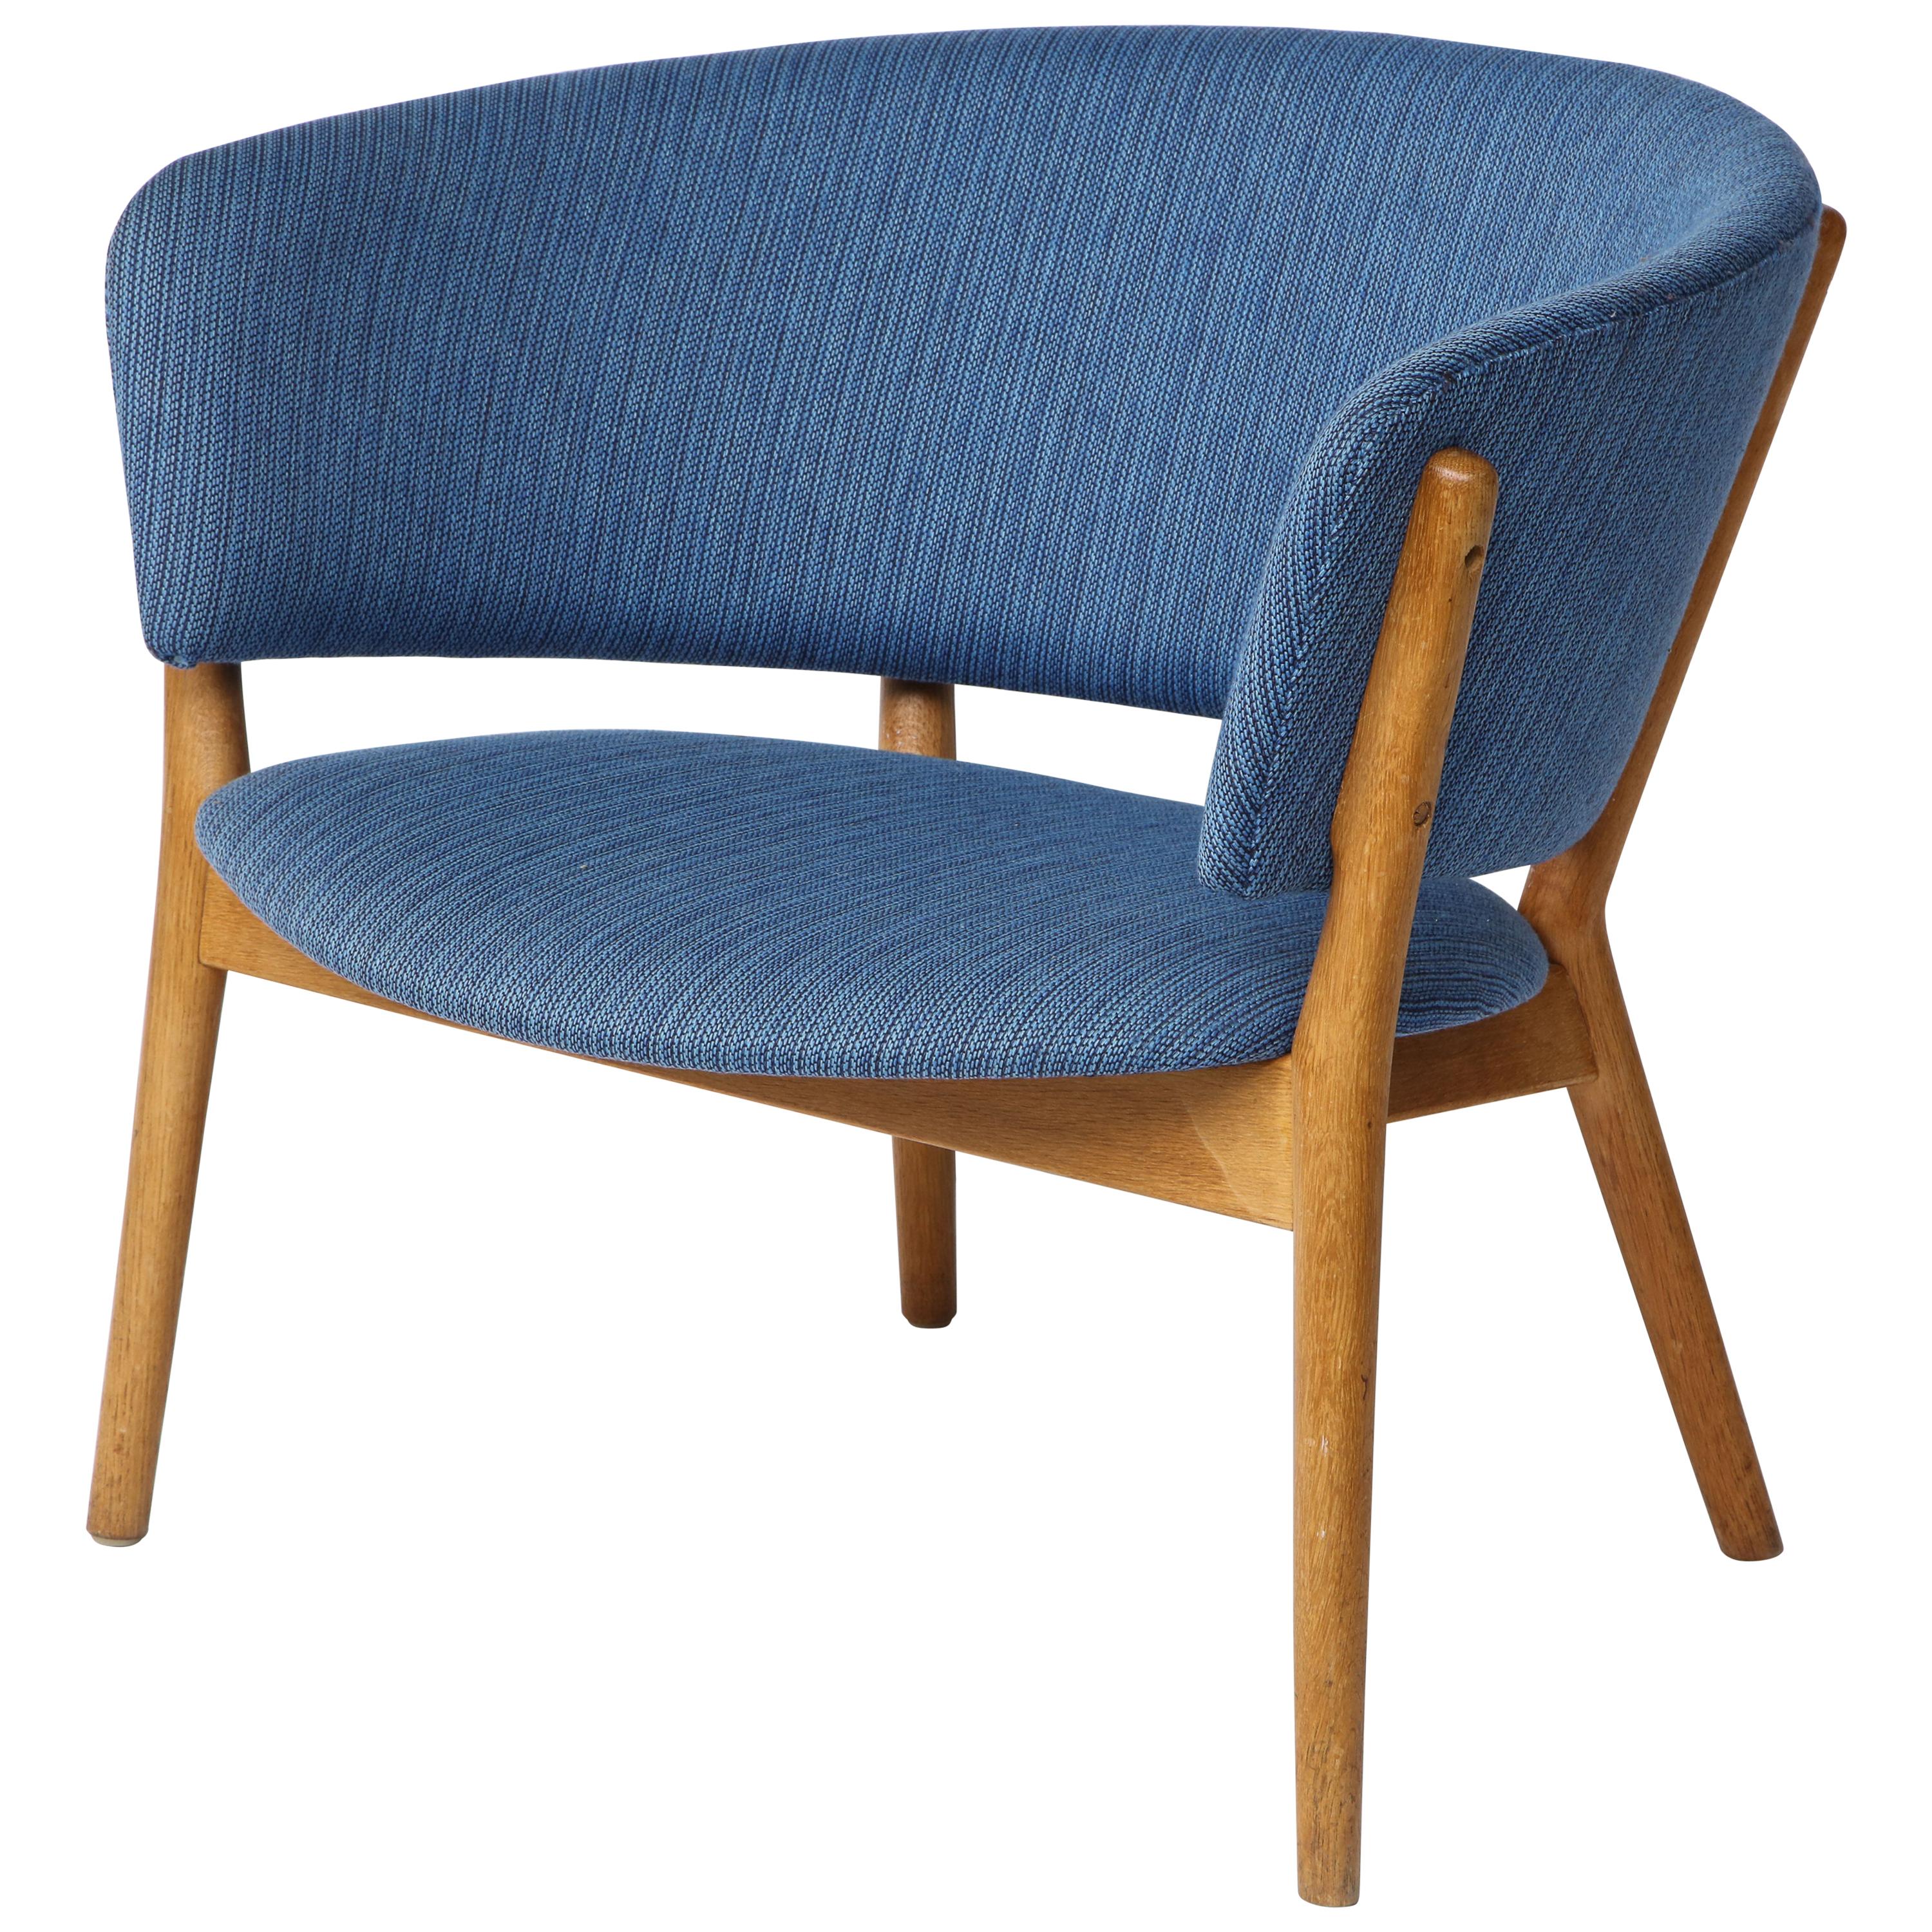 Nanna Ditzel ND83 Lounge Chair Upholstered in Blue Fabric, Denmark, 1950s